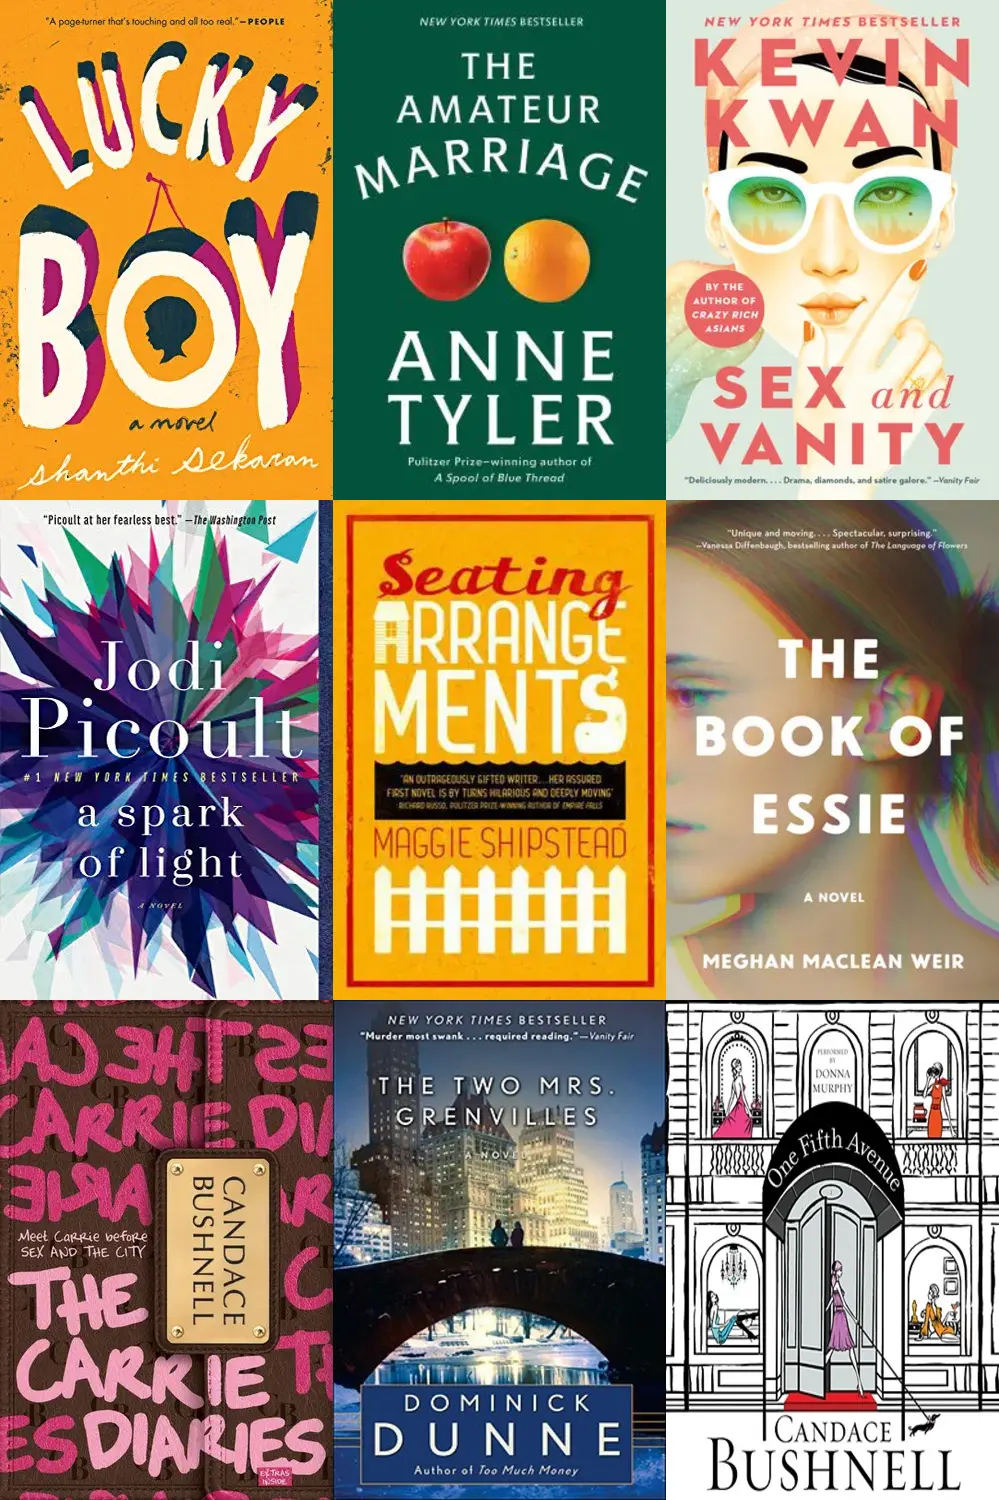 If I liked Small Admissions by Amy Poeppel, what should I read next?